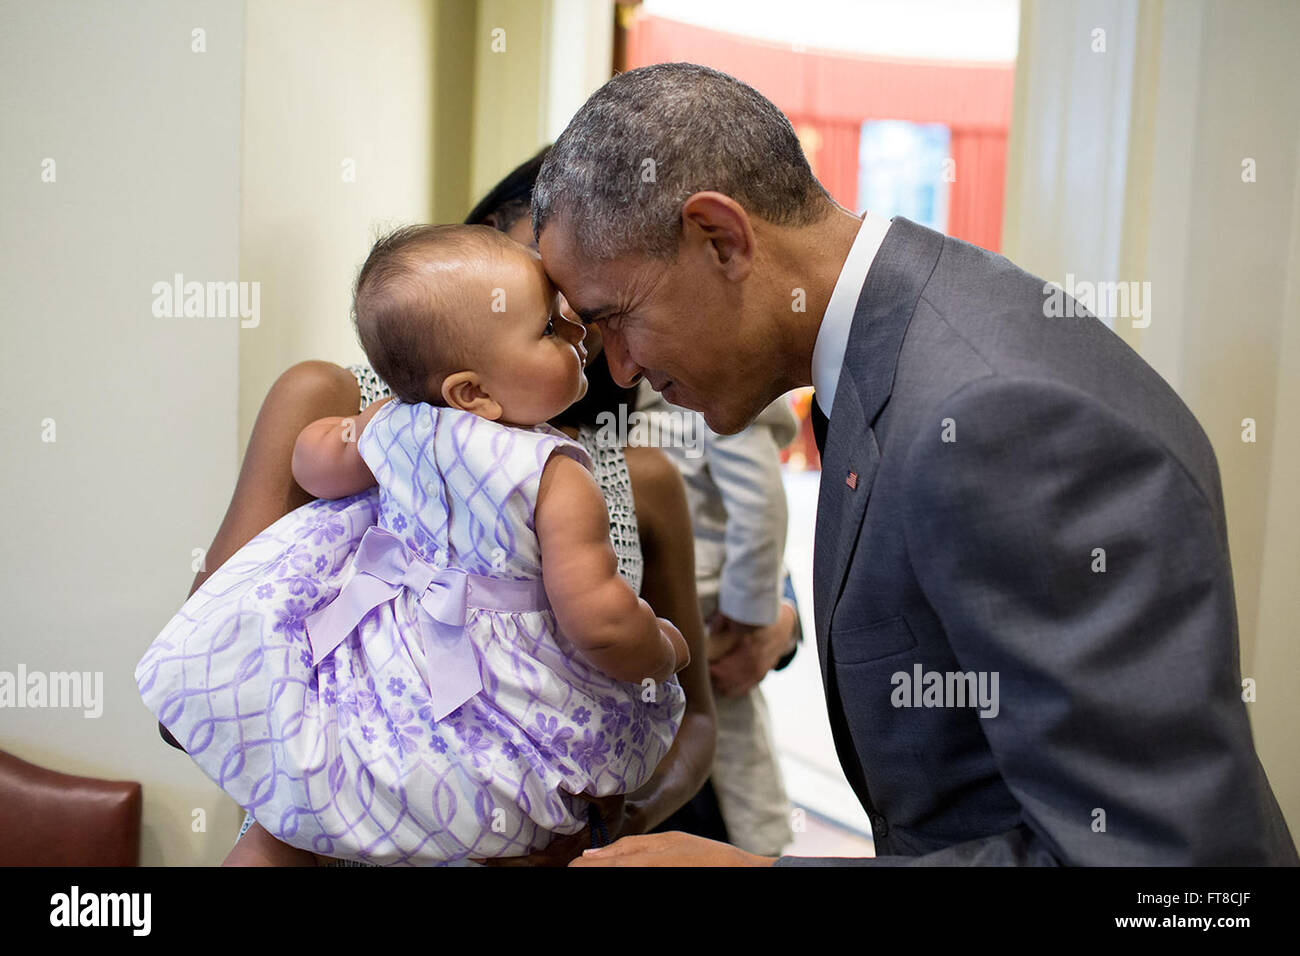 July 17, 2015 'The President greets nine-month-old Josephine Gronniger, whose father, Tim Gronniger, brought his family by the Oval Office for a family photo.' (Official White House Photo by Pete Souza) Stock Photo